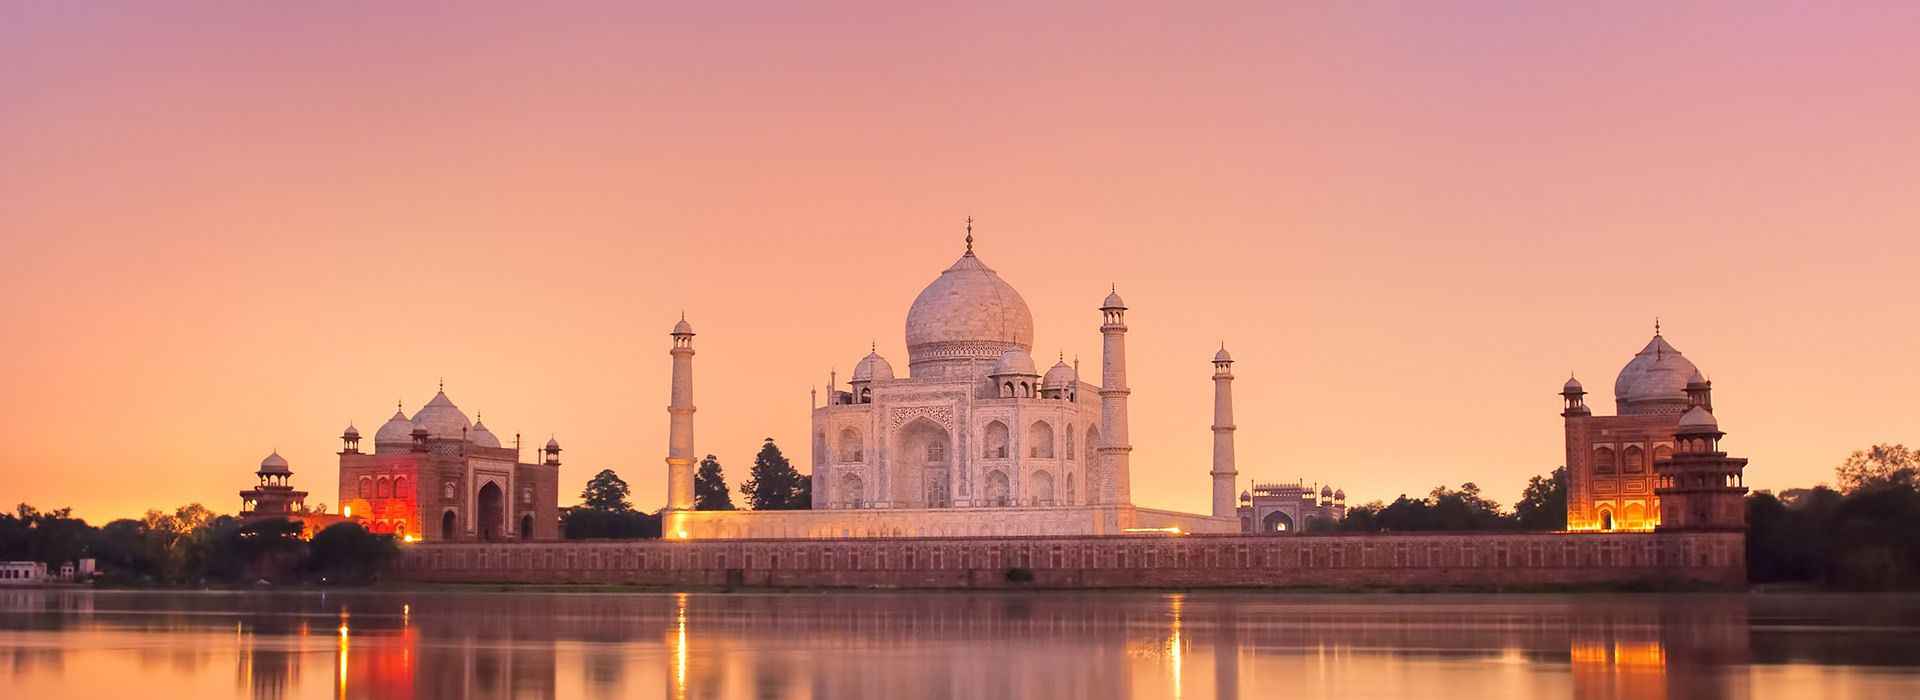 India Travel Guide - Travel Insights and Tips